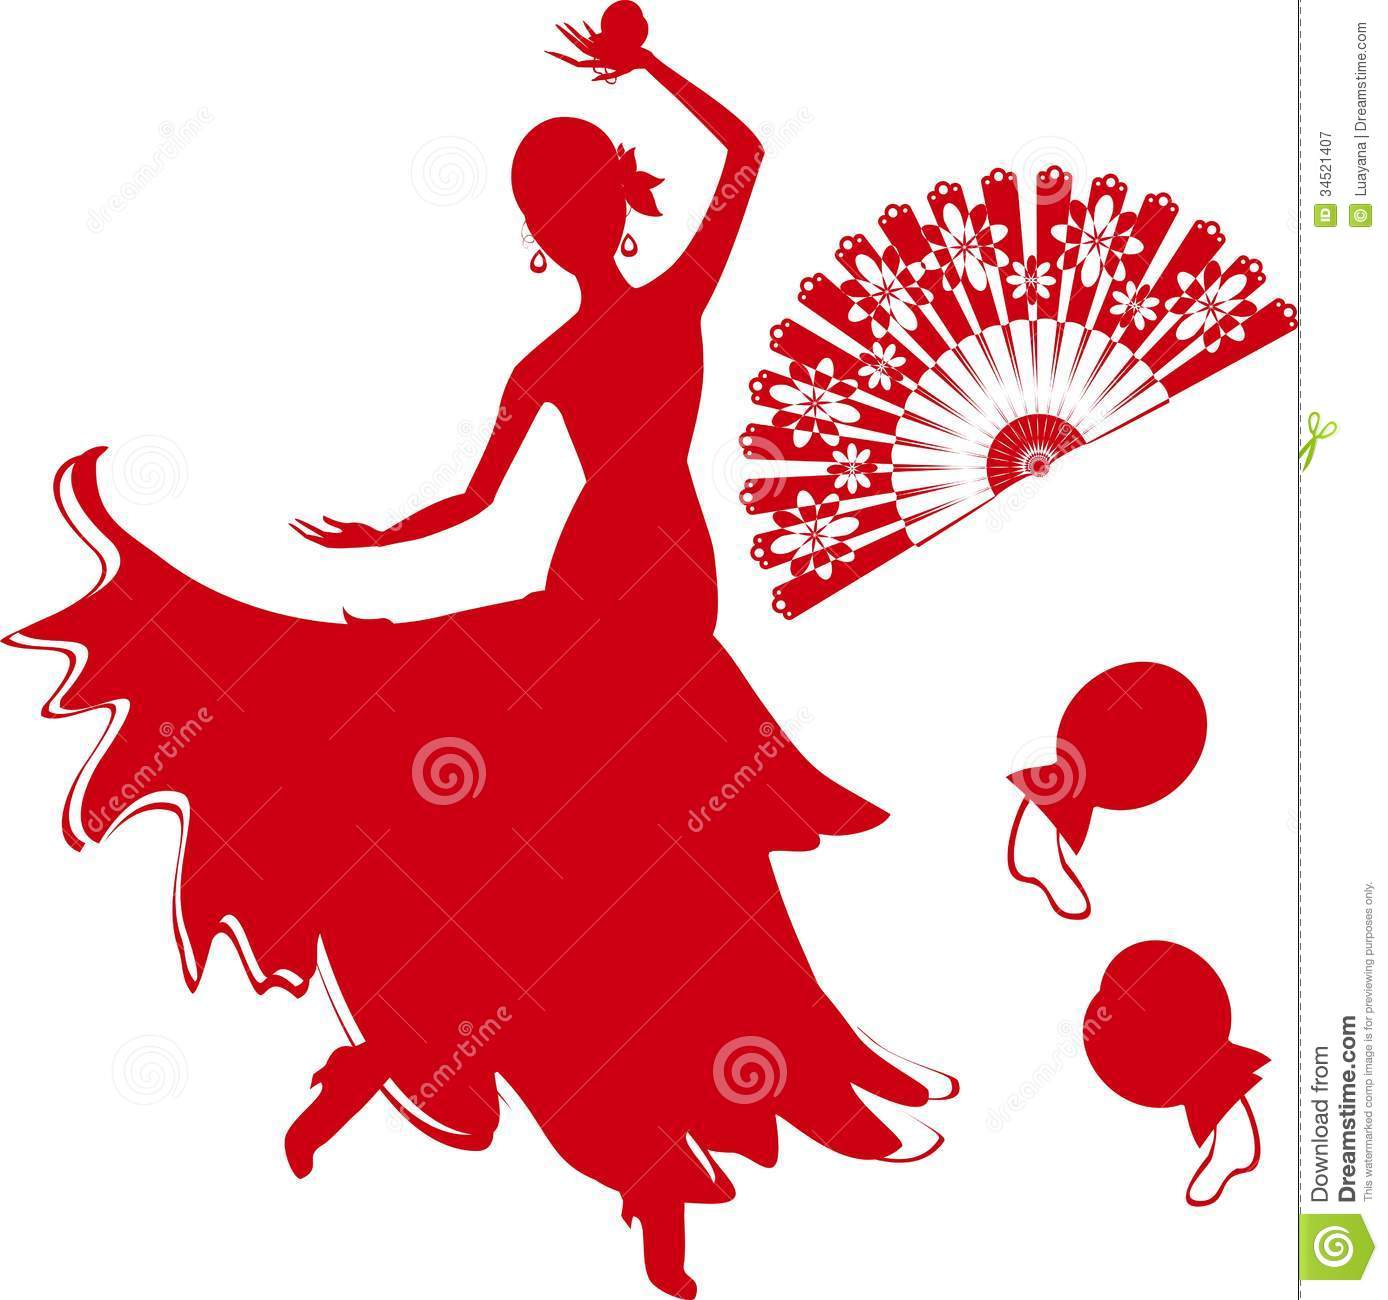 Silhouette Of Flamenco Dancer Royalty Free Stock Photography   Image    